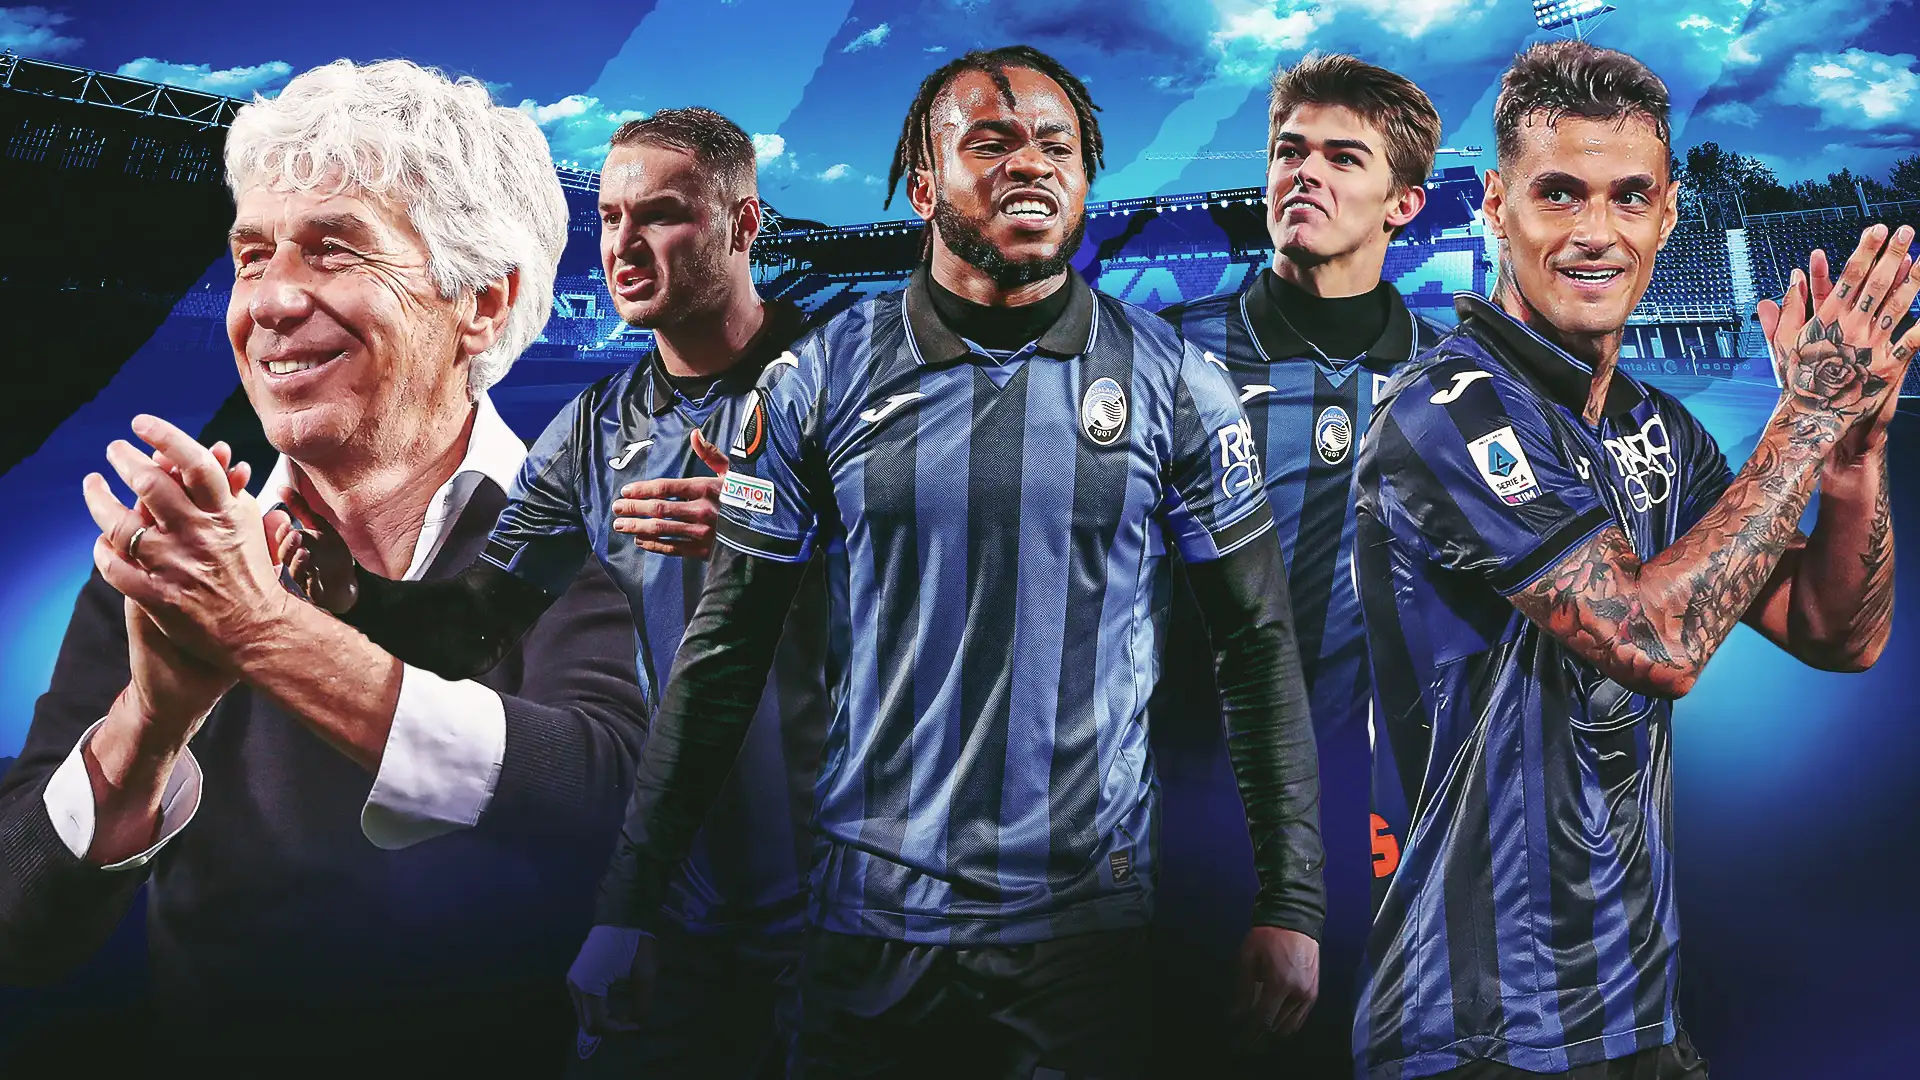 Atalanta are doing it again! Europe’s biggest overachievers within touching distance of the trophy Gian Piero Gasperini & Co. so richly deserve